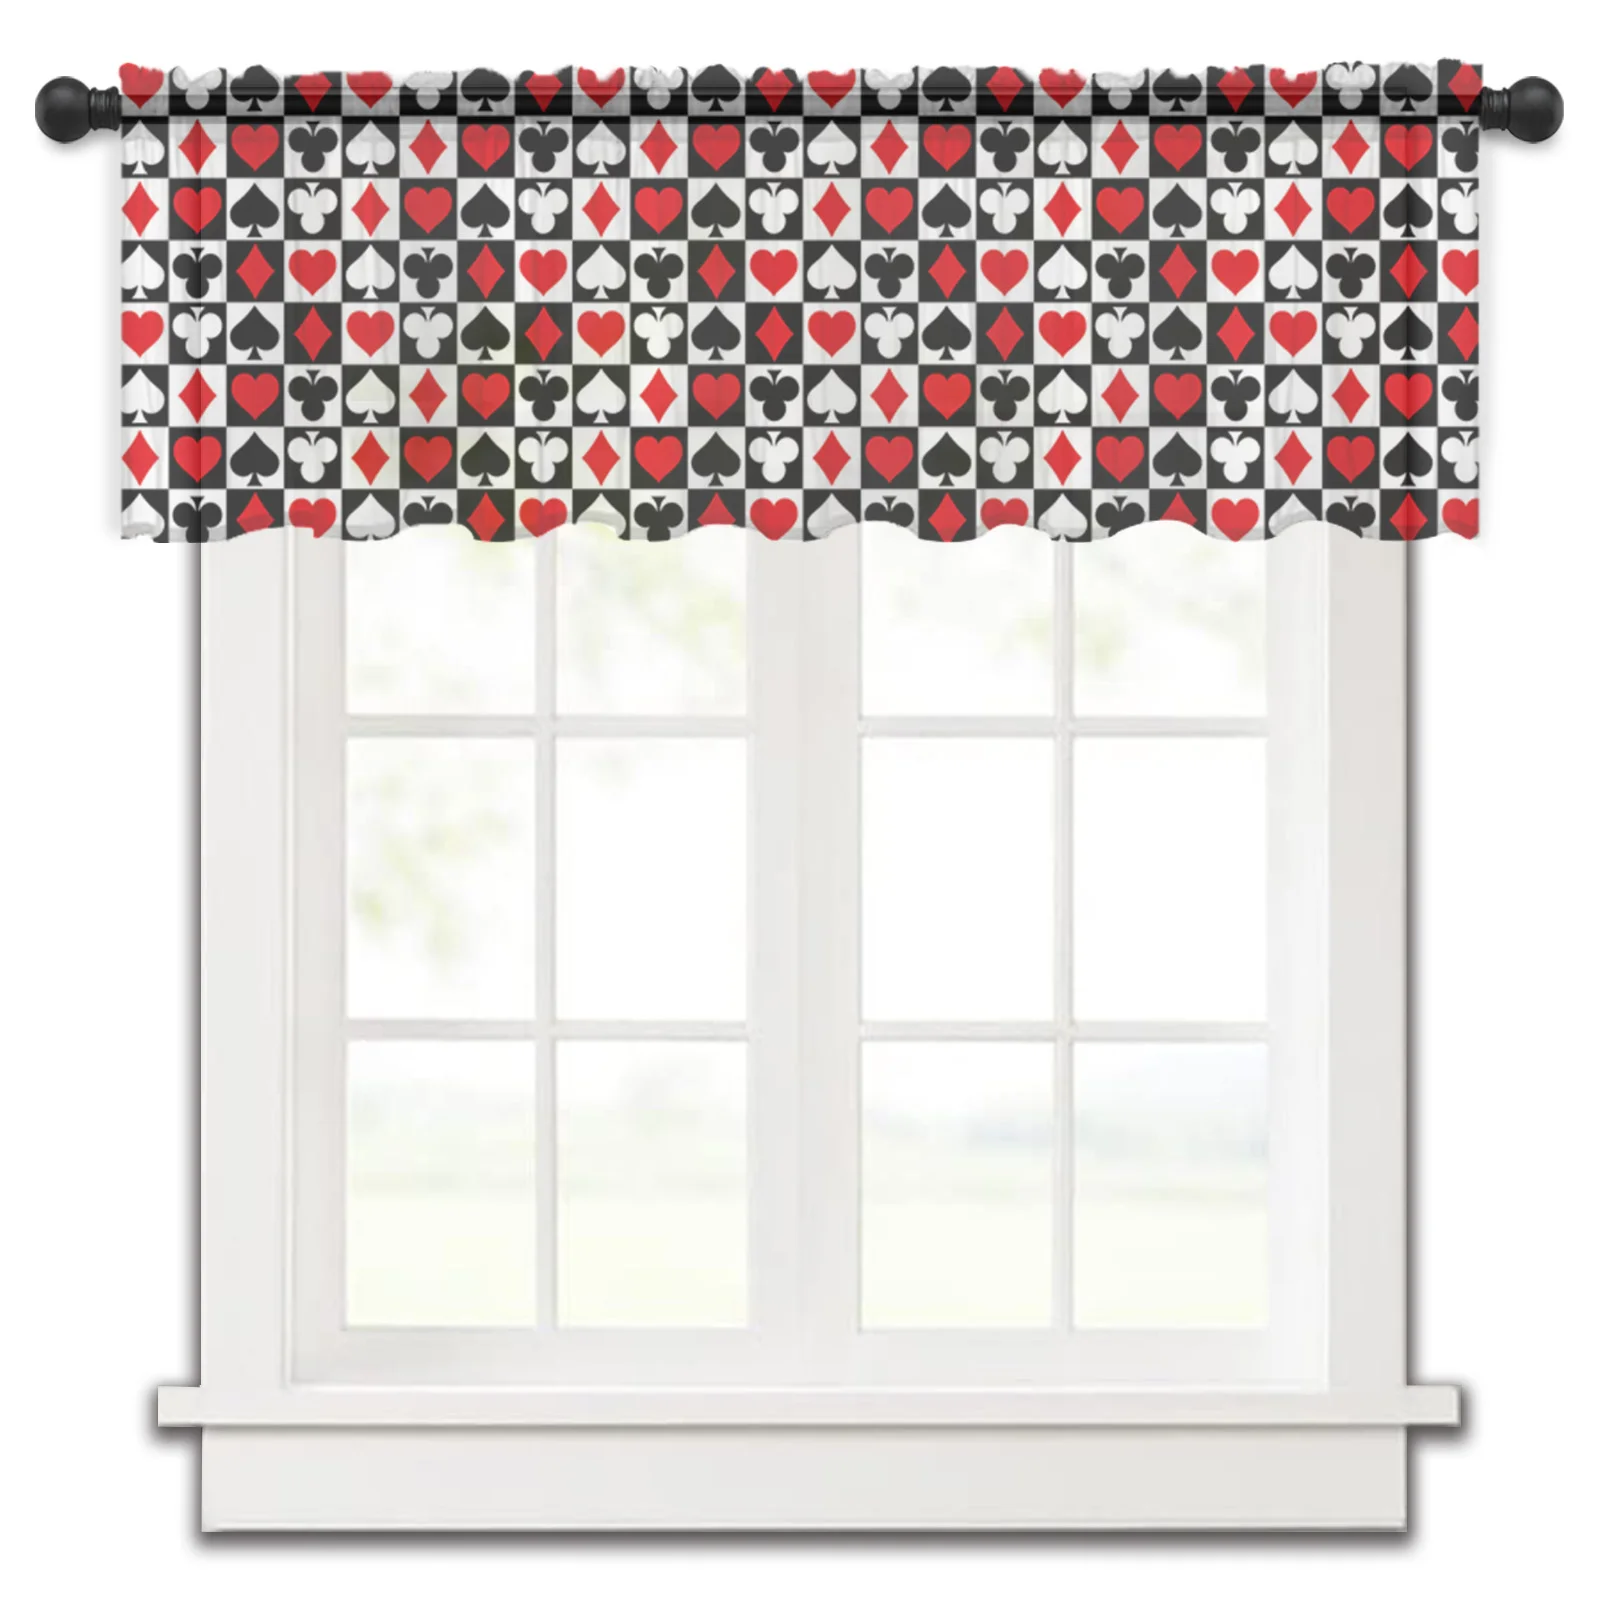 

Squares Spades Hearts Poker Plaid Kitchen Small Curtain Tulle Sheer Short Curtain Bedroom Living Room Home Decor Voile Drapes